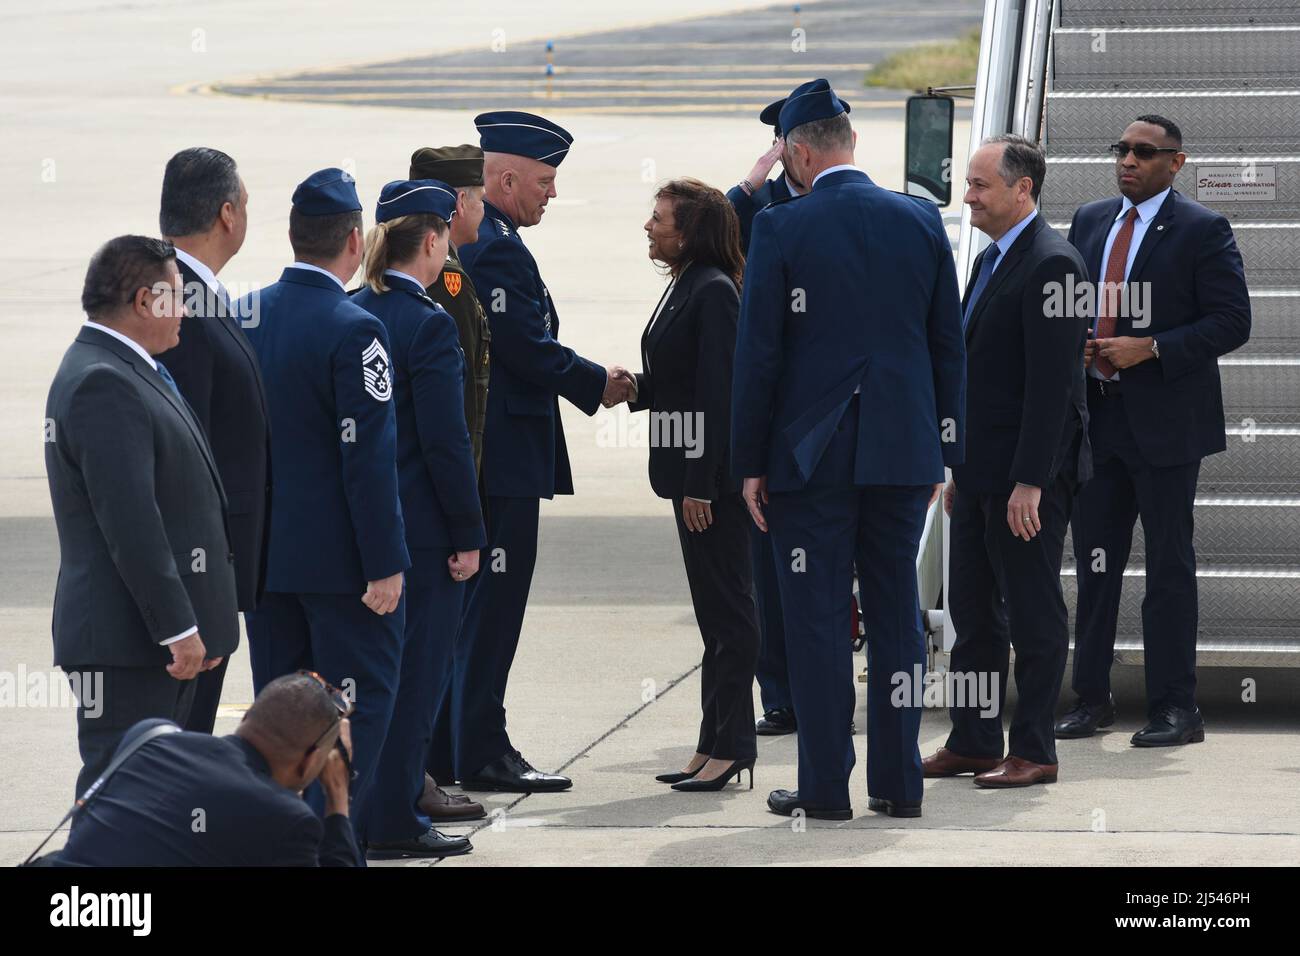 U.S. Vice President Kamala Harris is greeted by U.S. Space Force Chief of Space Operations Gen. John W. “Jay” Raymond, upon her arrival at Vandenberg Space Force Base, Calif., April 18, 2022. (U.S. Space Force photo by Michael Peterson) Stock Photo